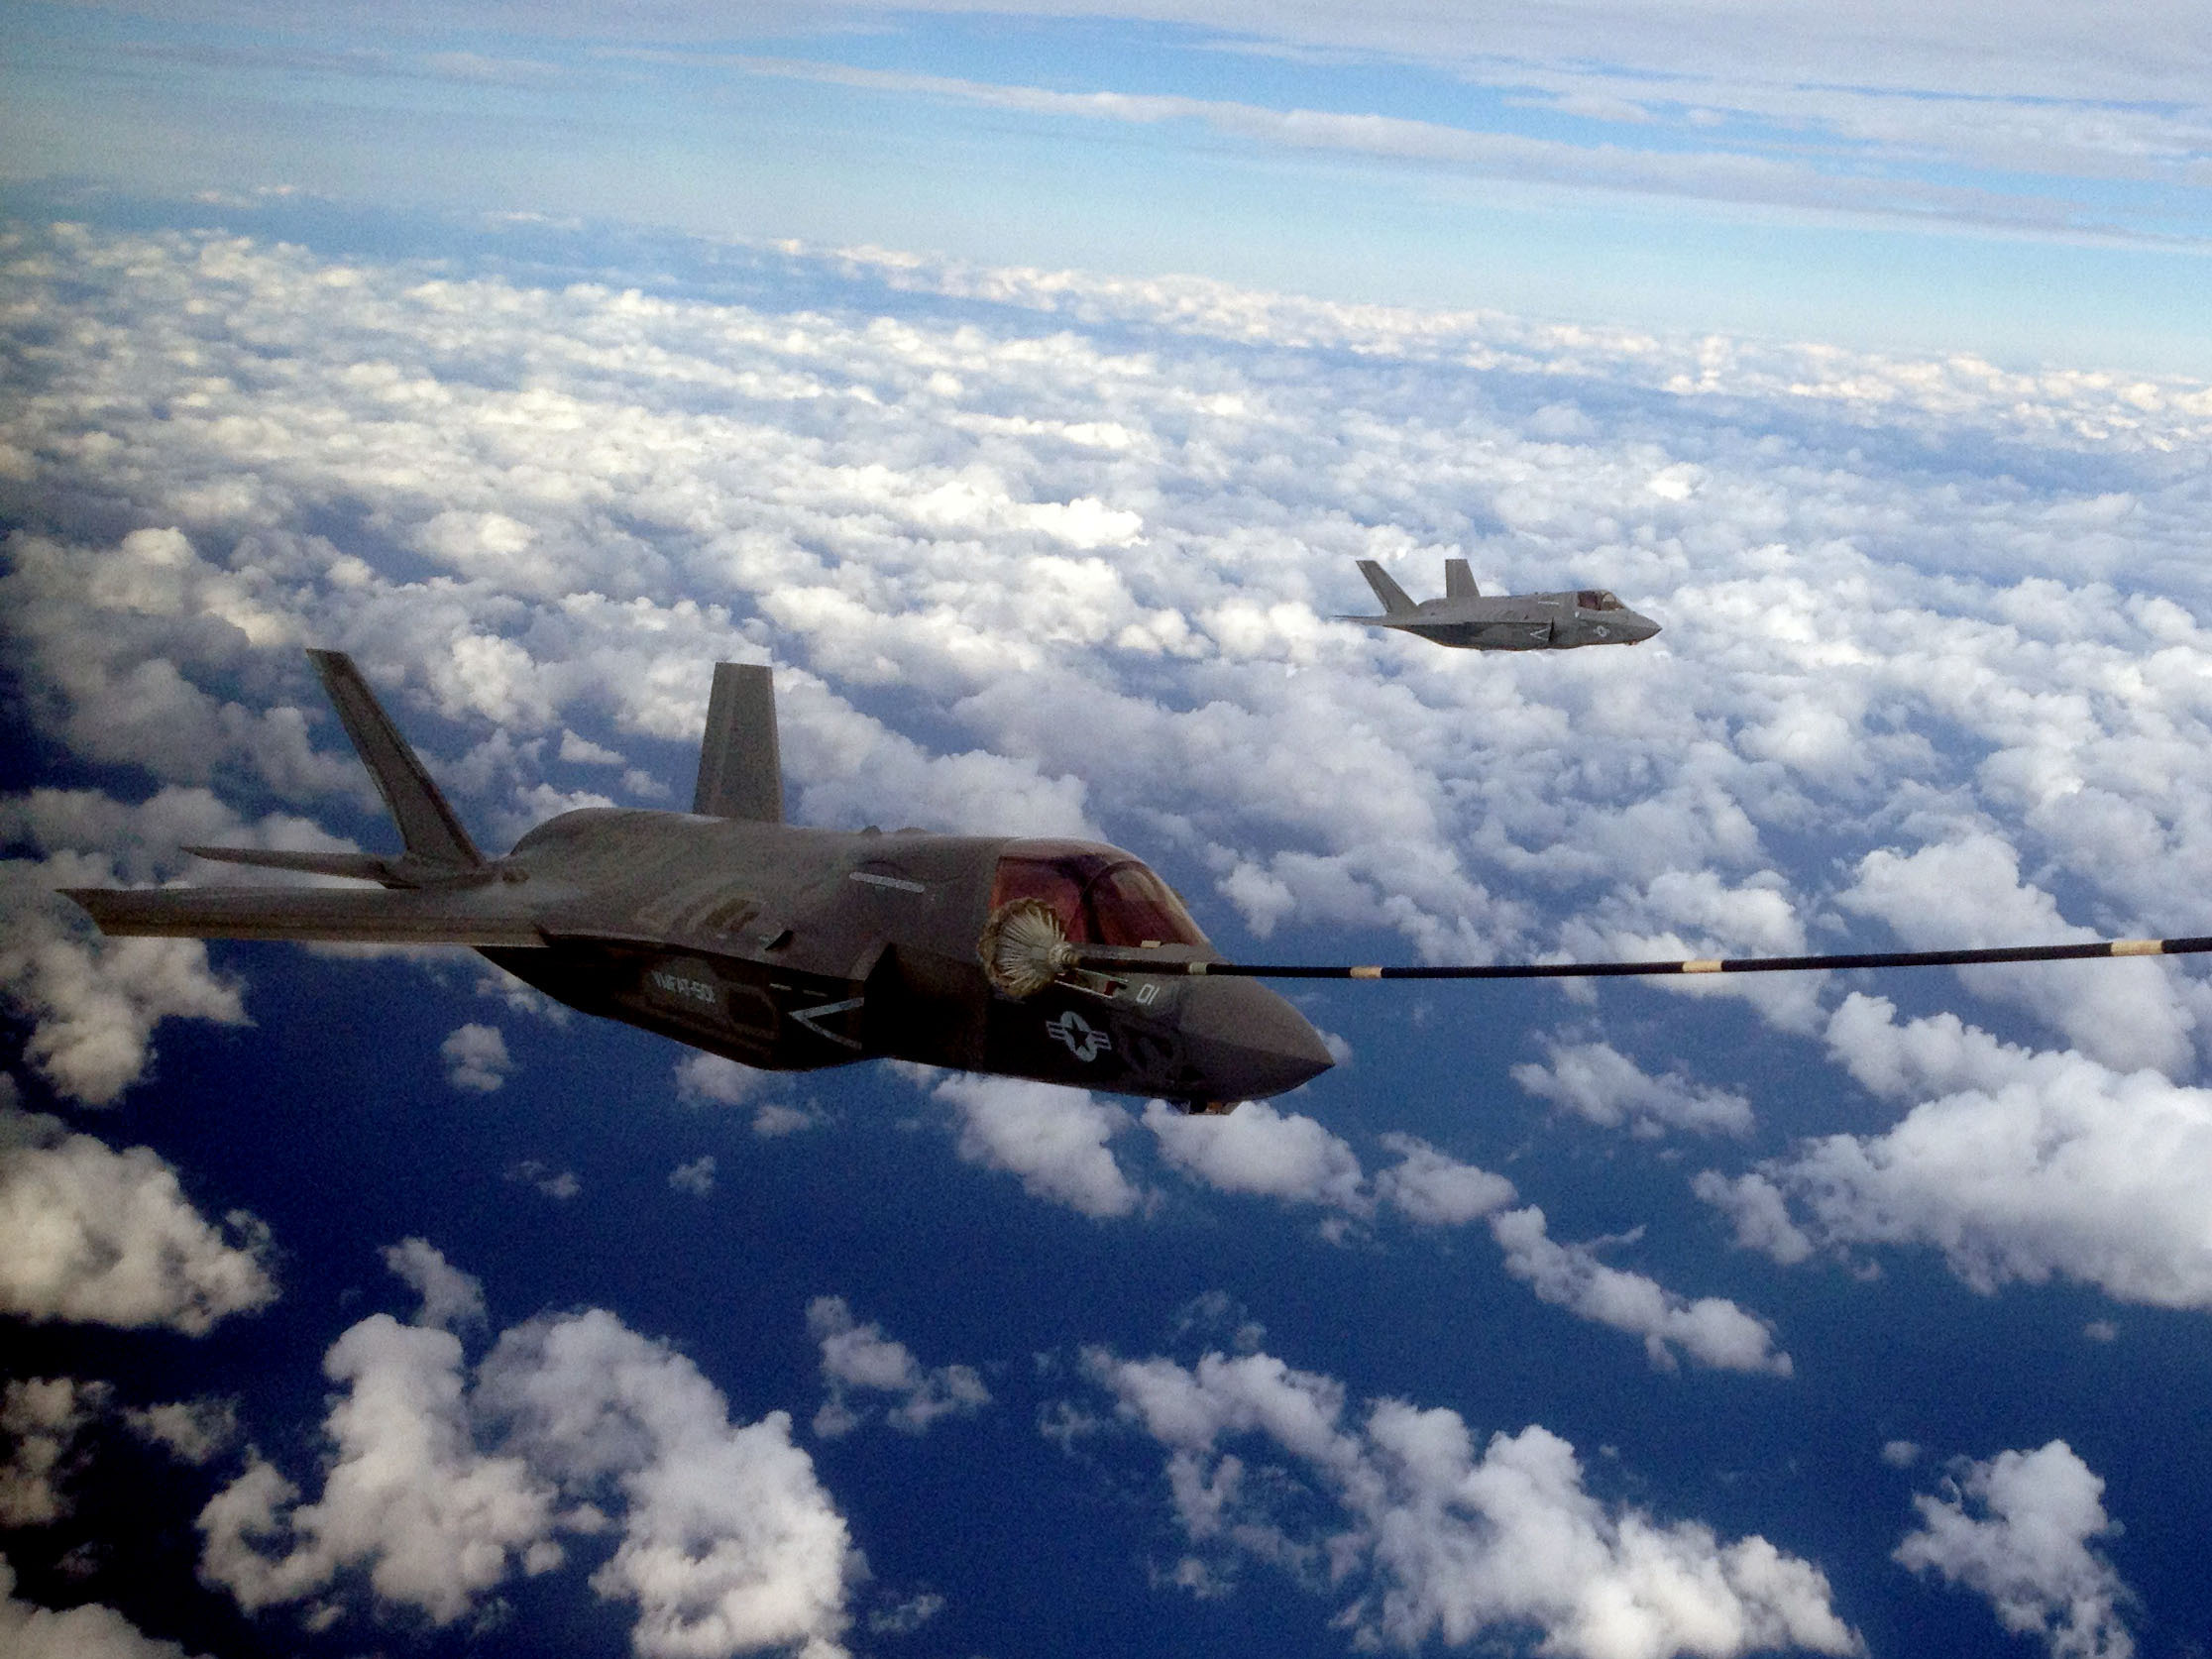 Two F-35B Joint Strike Fighters taking on fuel